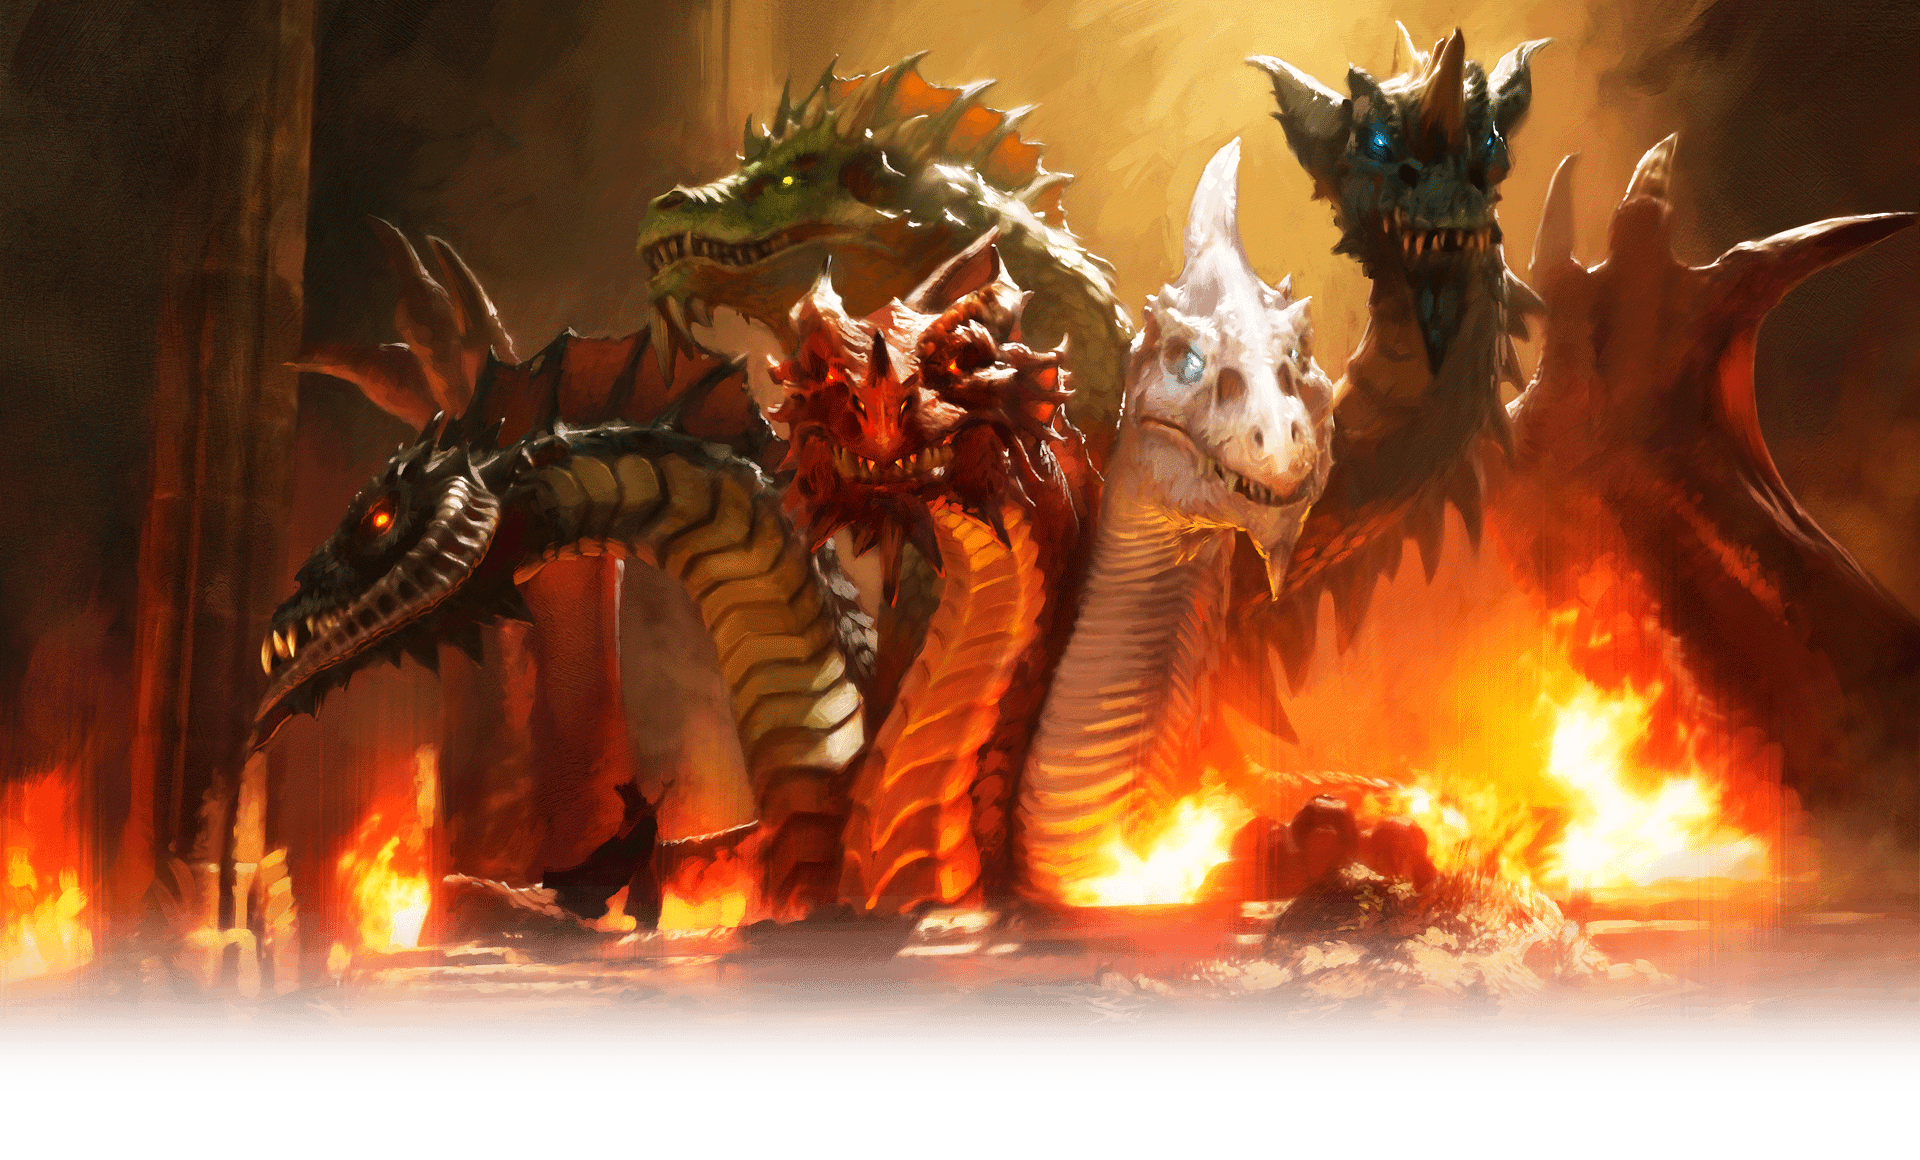 d&d tiamat 5e dragon. Dungeons and dragons, Dungeons and dragons